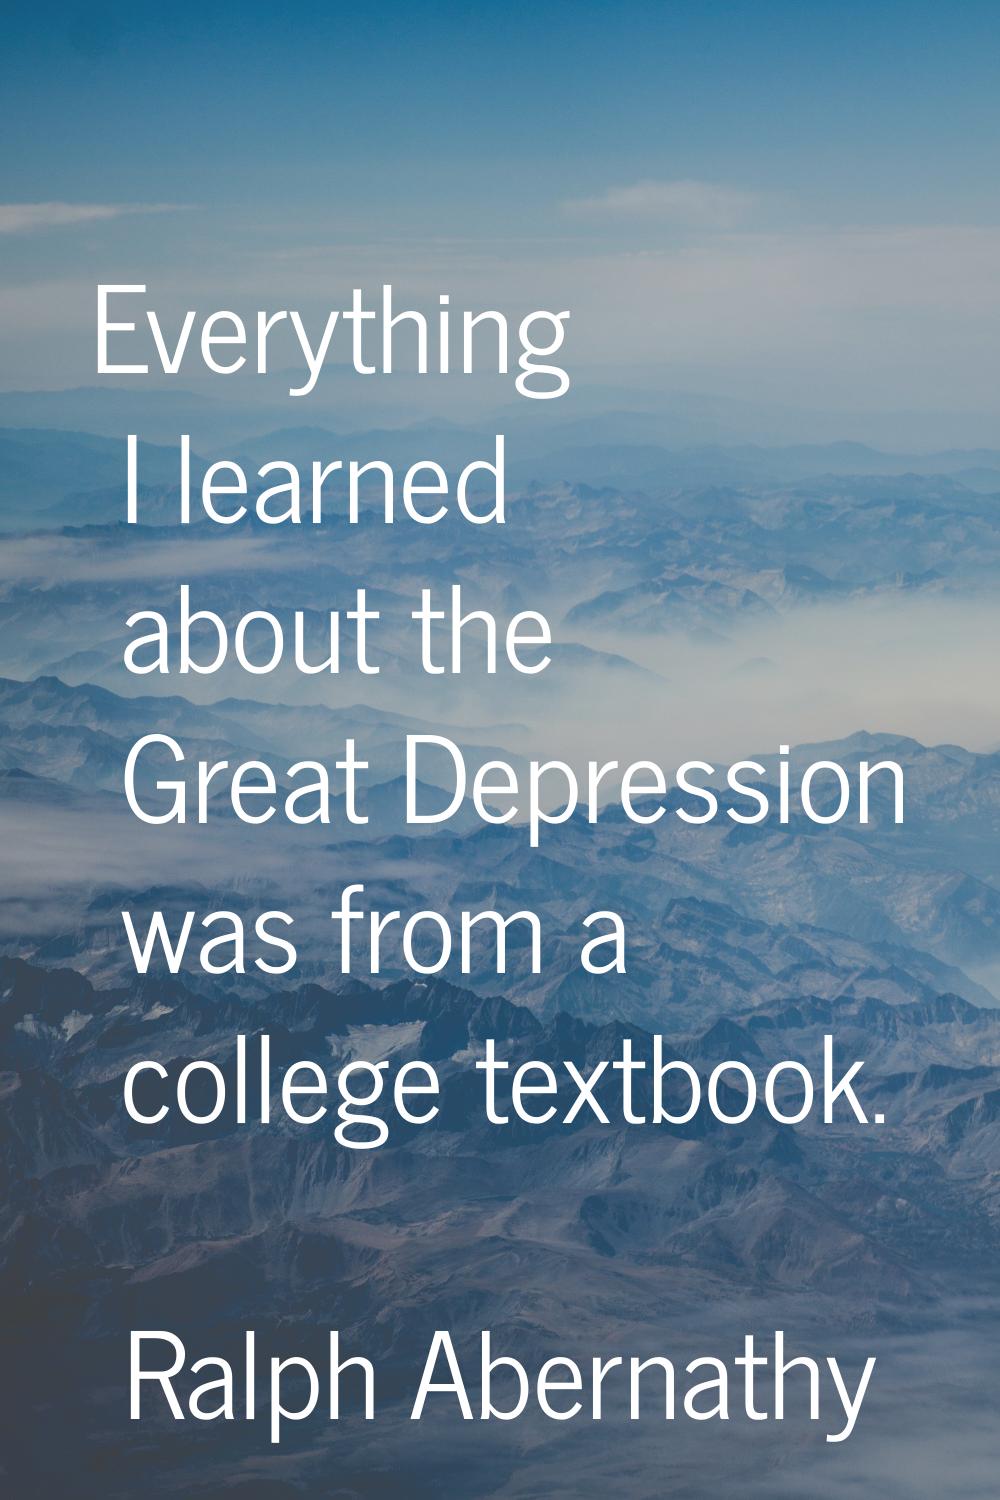 Everything I learned about the Great Depression was from a college textbook.